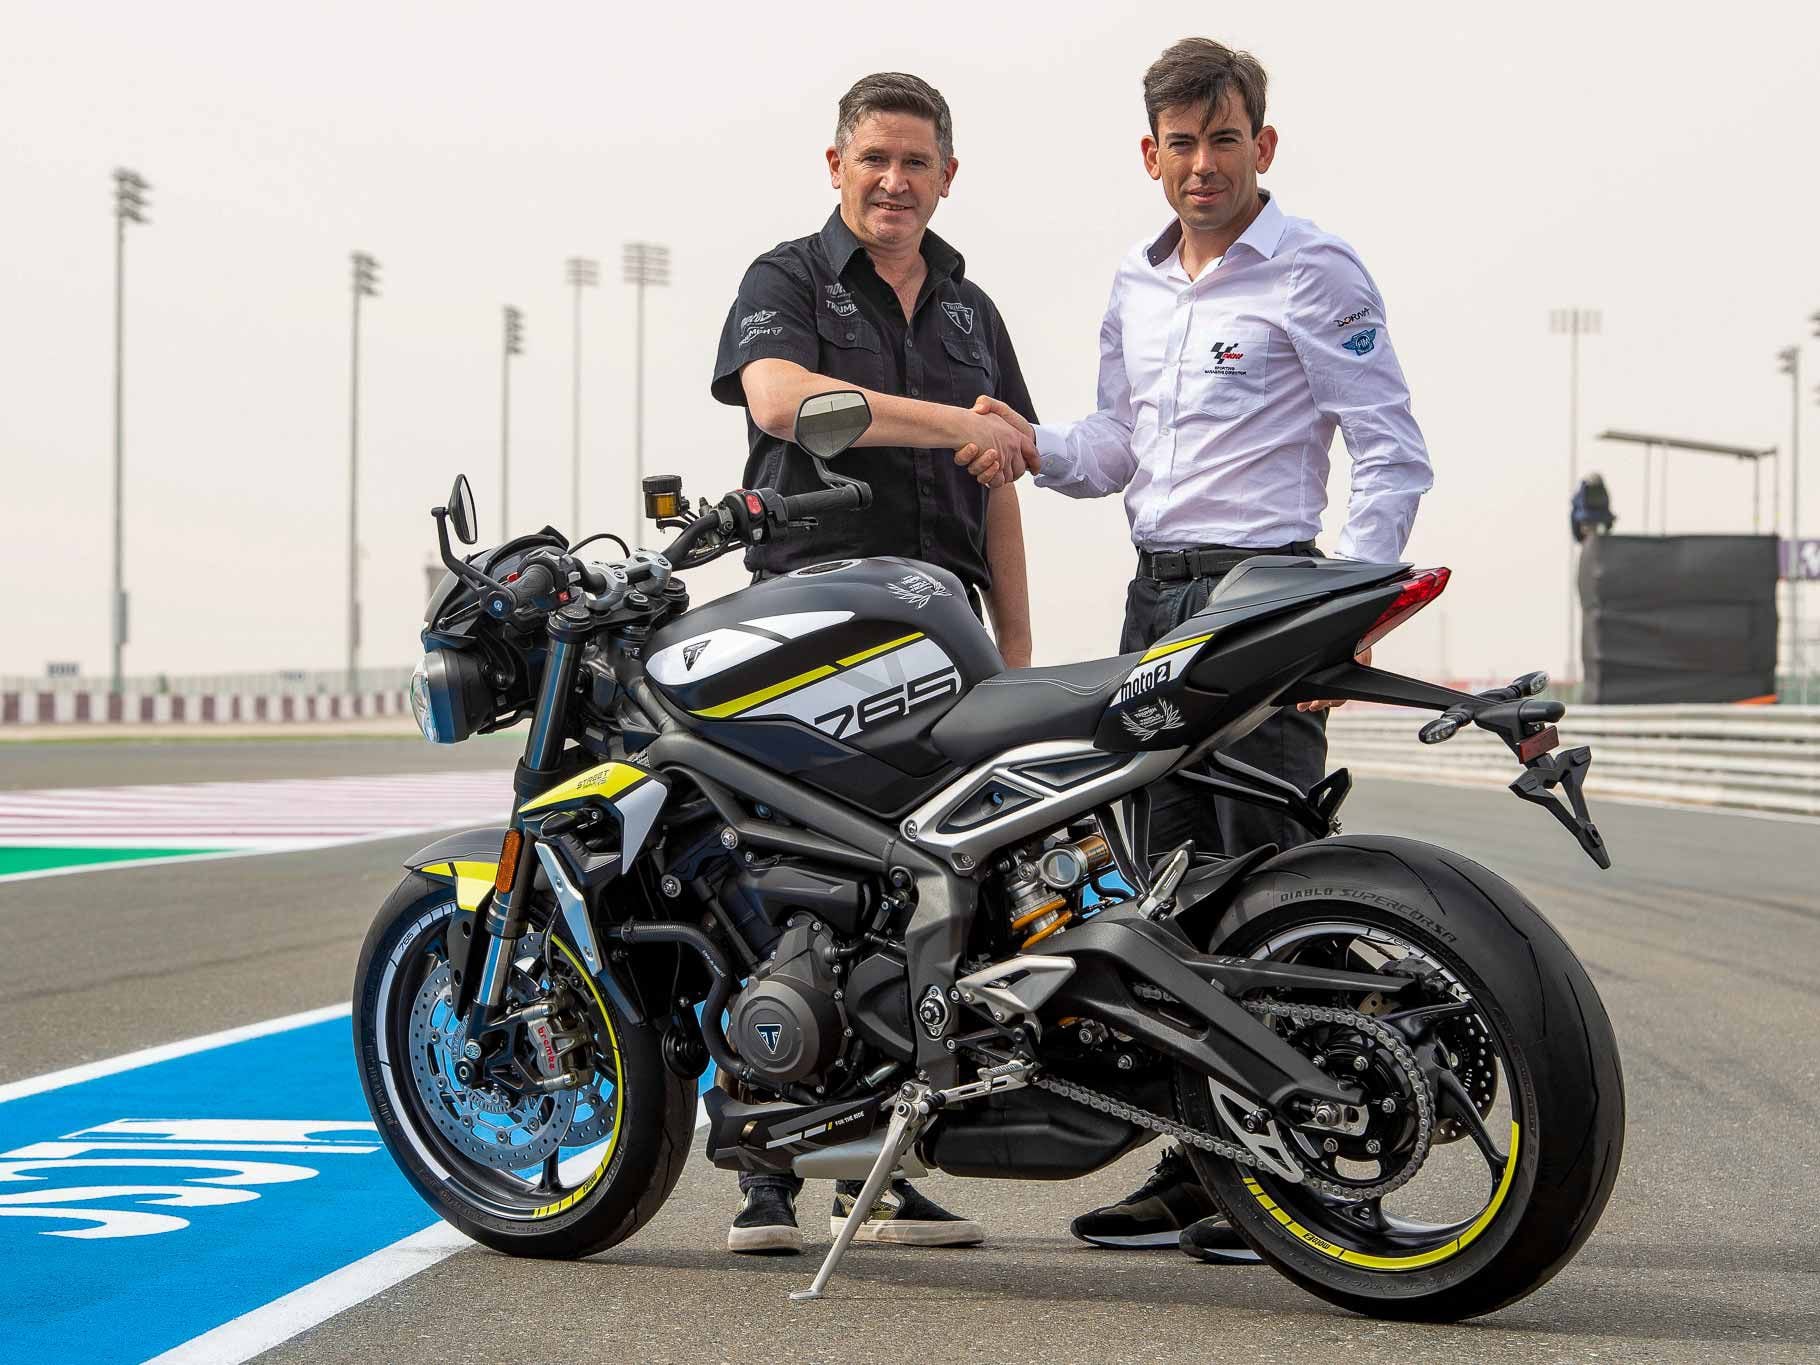 Steve Sargent, Triumph Motorcycles chief product officer, and Carlos Ezpeleta, Dorna Sports managing director, unveil the Street Triple RS that will go to the Triumph Triple Trophy winner. 